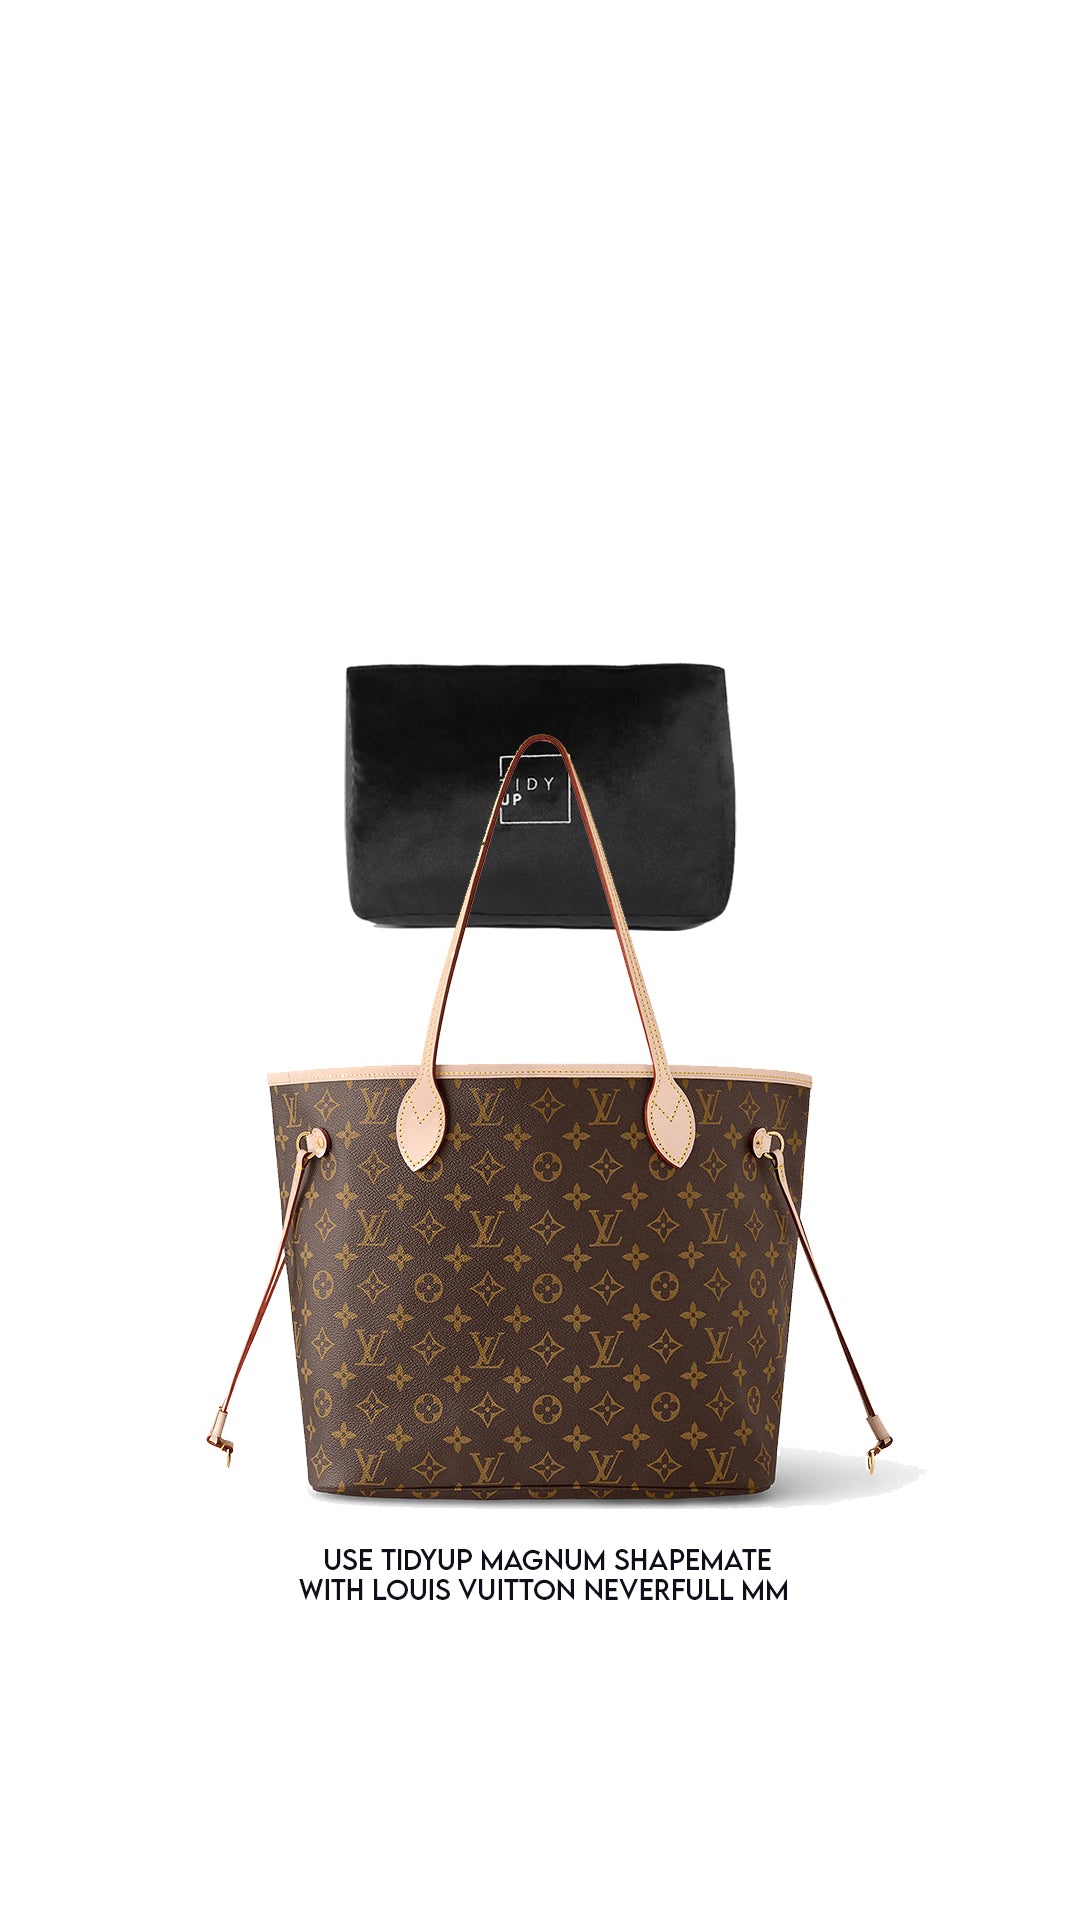 Louis Vuitton Monogram Neverfull MM Used condition 7/10 Selling at SOLD T…   Louis vuitton bag neverfull, Louis vuitton neverfull monogram, Louis  vuitton monogram